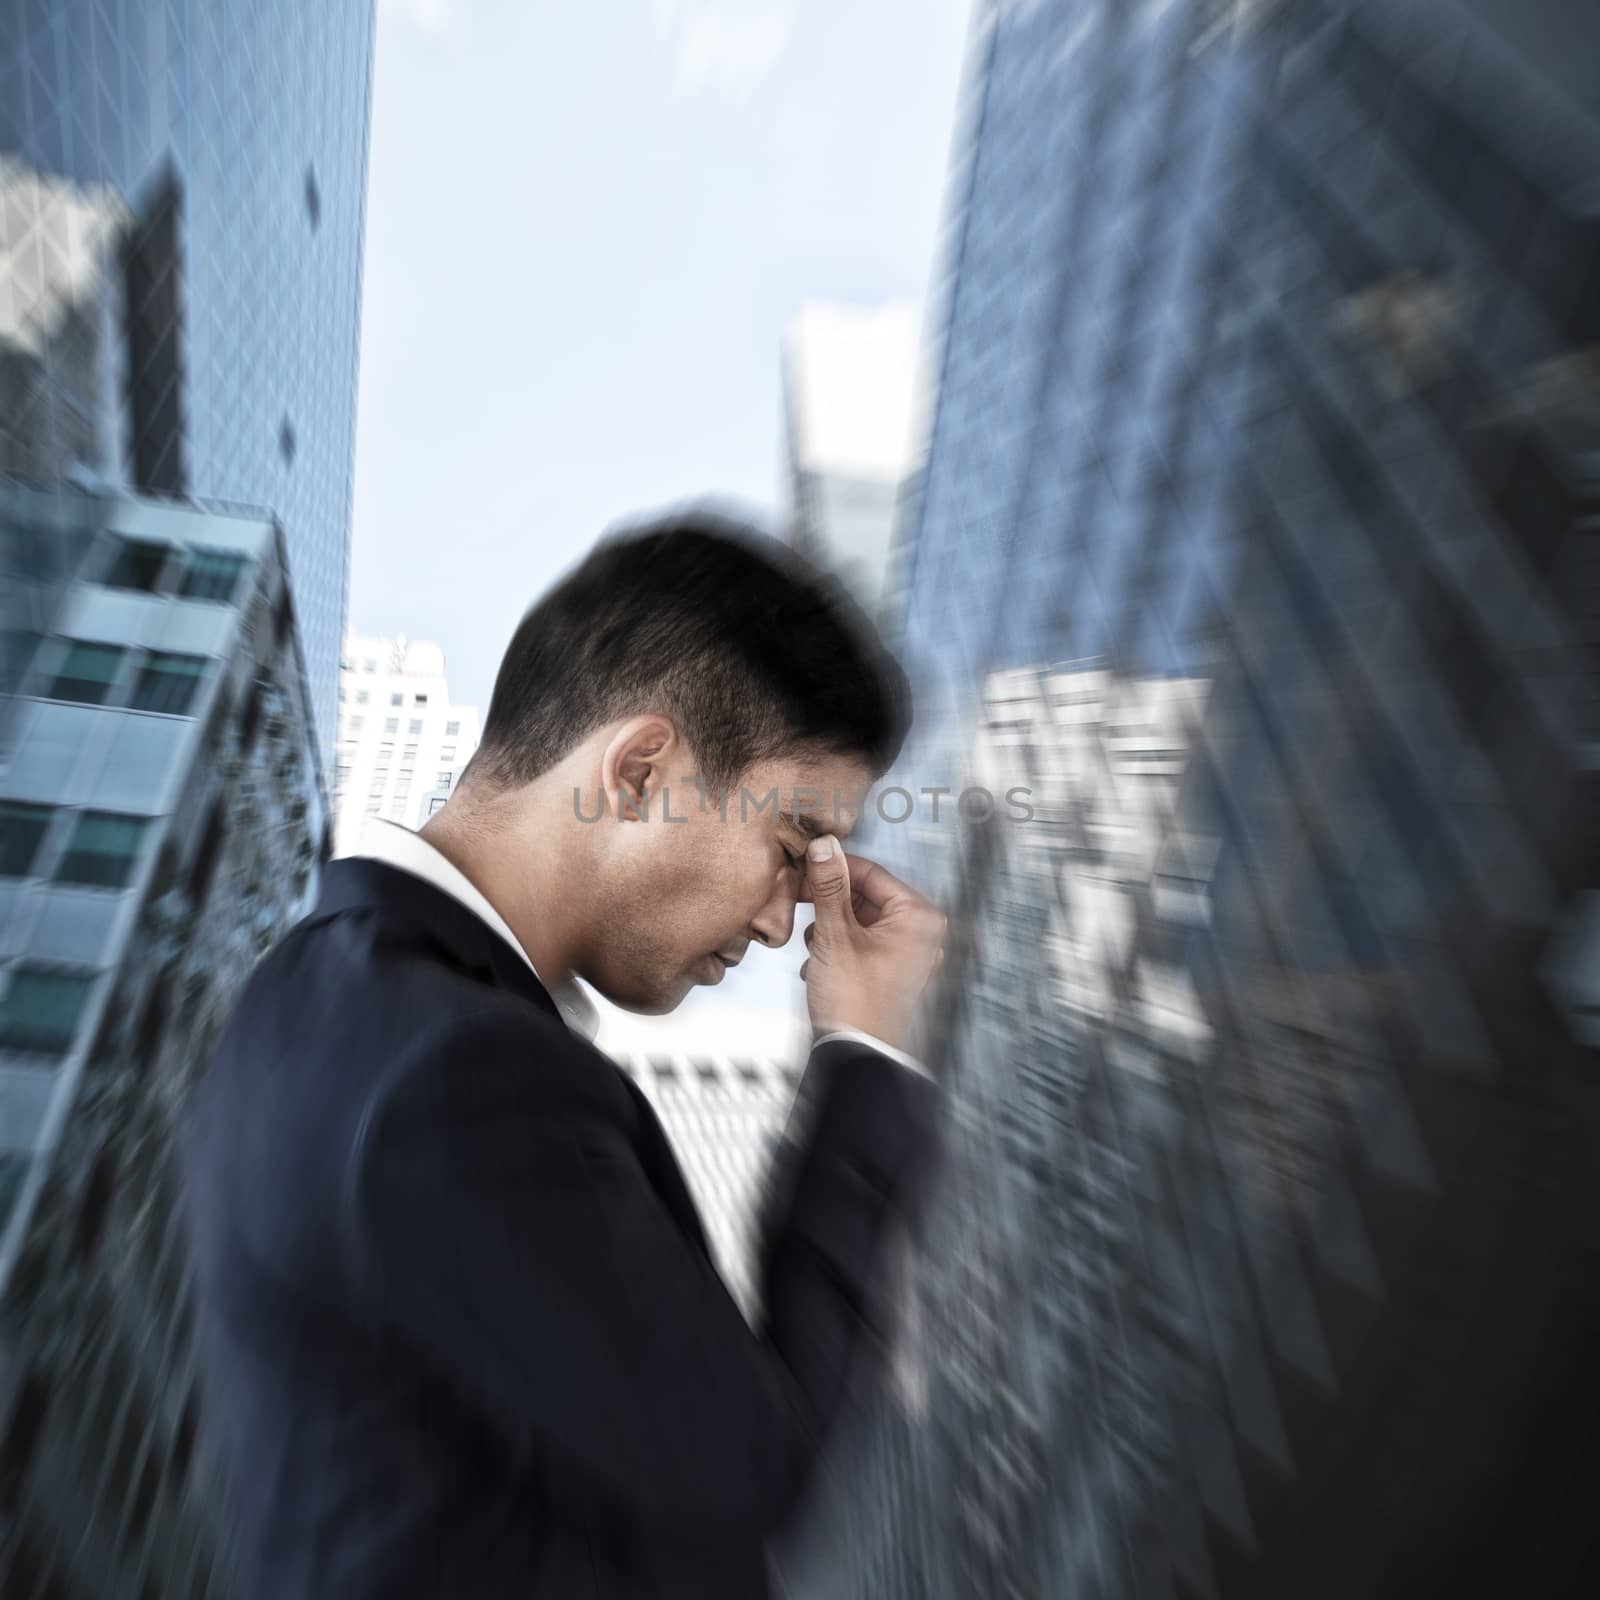 Composite image of side view of businessman suffering from headache by Wavebreakmedia